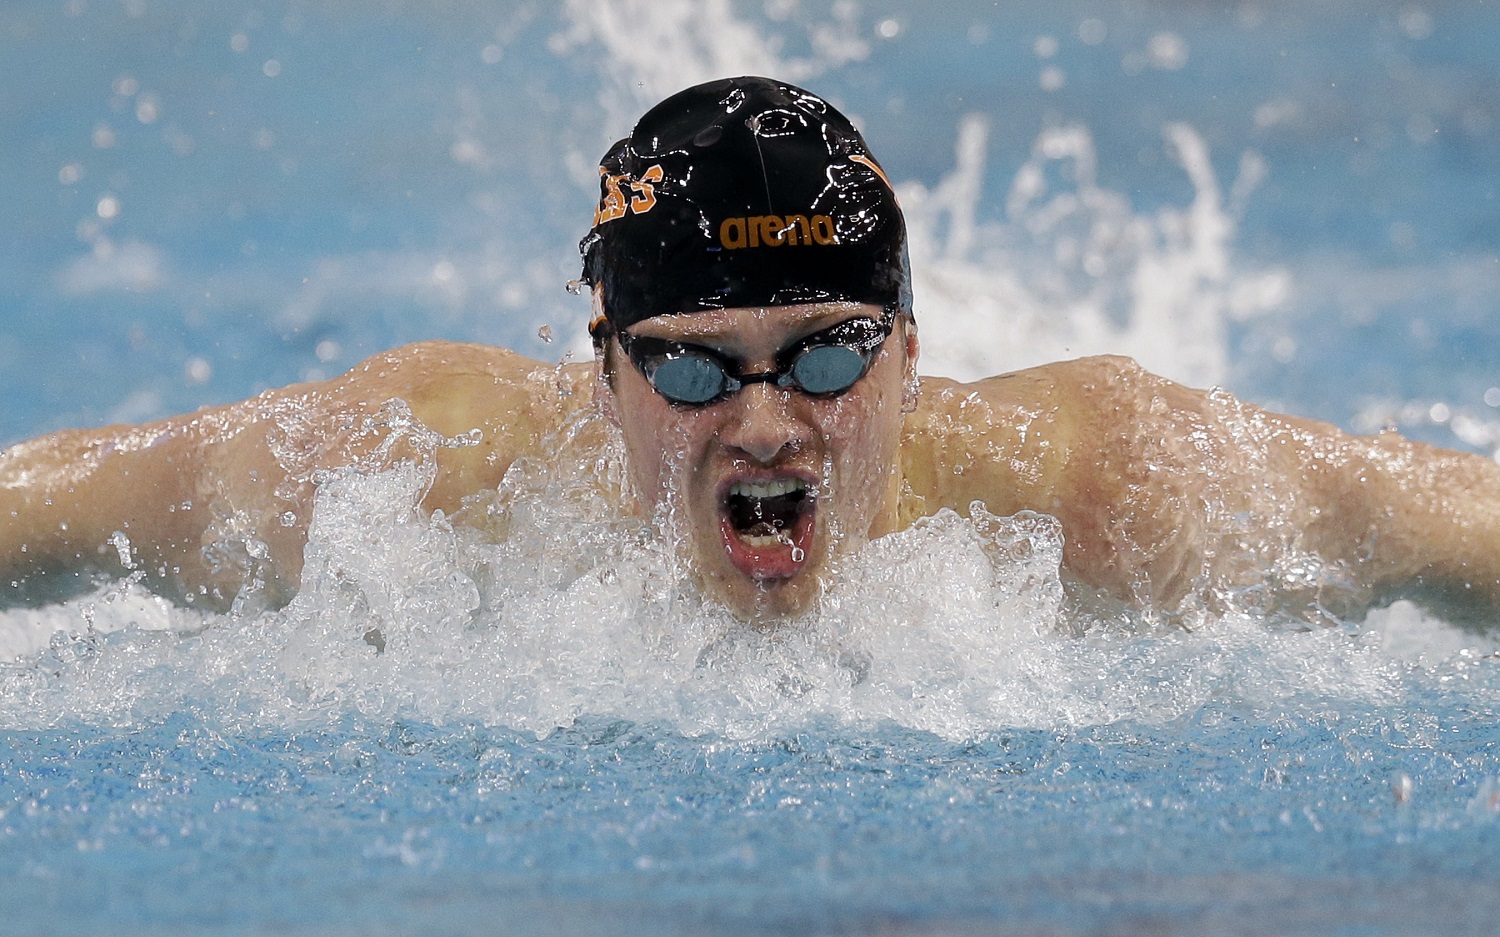 Jack Conger competes in the finals of the men's 200-meter butterfly at the Longhorn Aquatics Elite Invite swimming event, Sunday, June 5, 2016, in Austin, Texas. (AP Photo/Eric Gay)